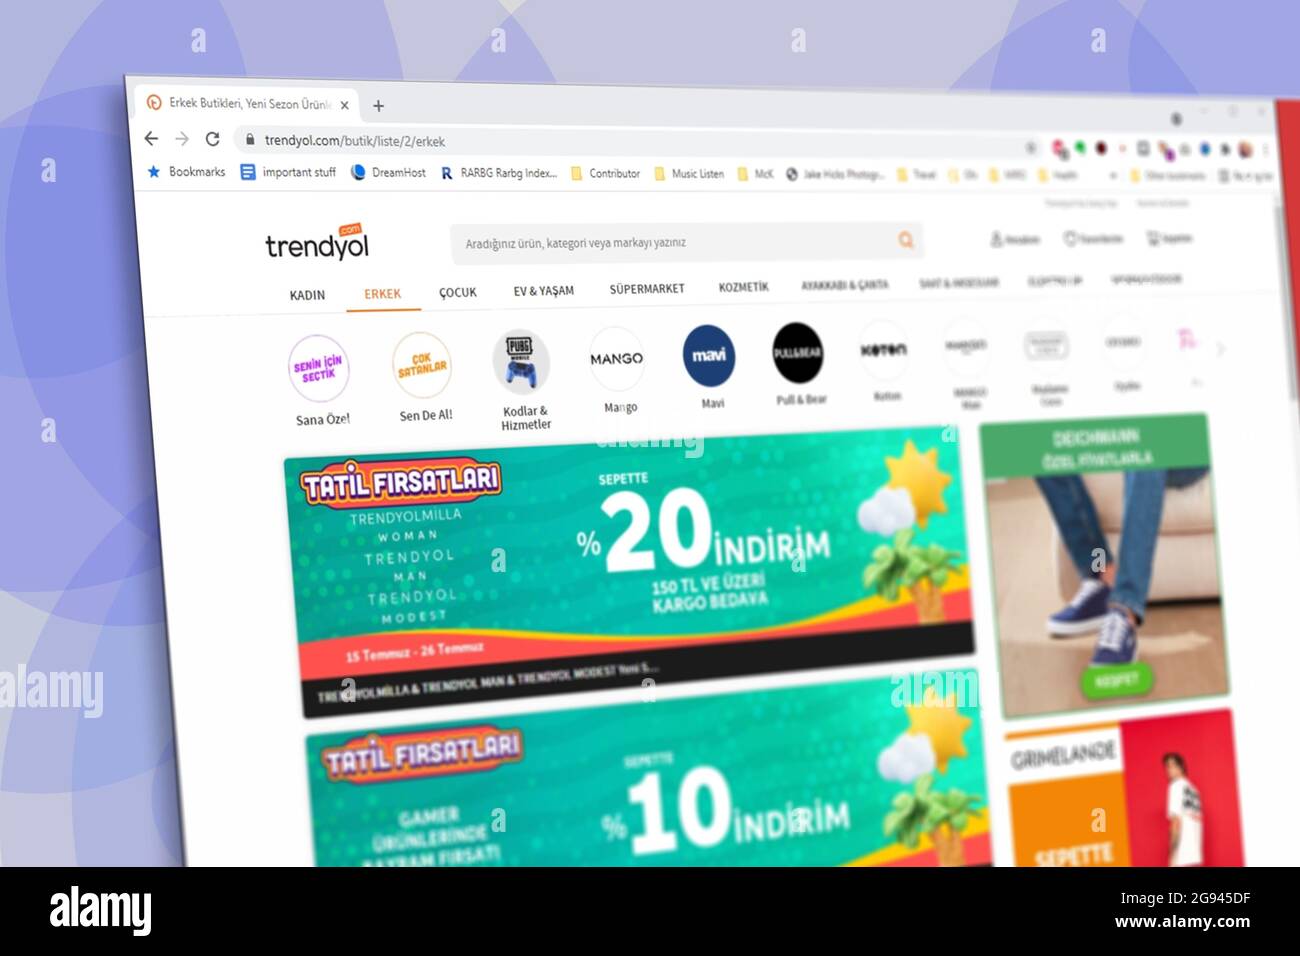 Istanbul, Turkey - July 2021: Illustrative Editorial screenshot of Turkish Trendyol e-commerce website homepage. Trendyol logo visible with blurred ou Stock Photo